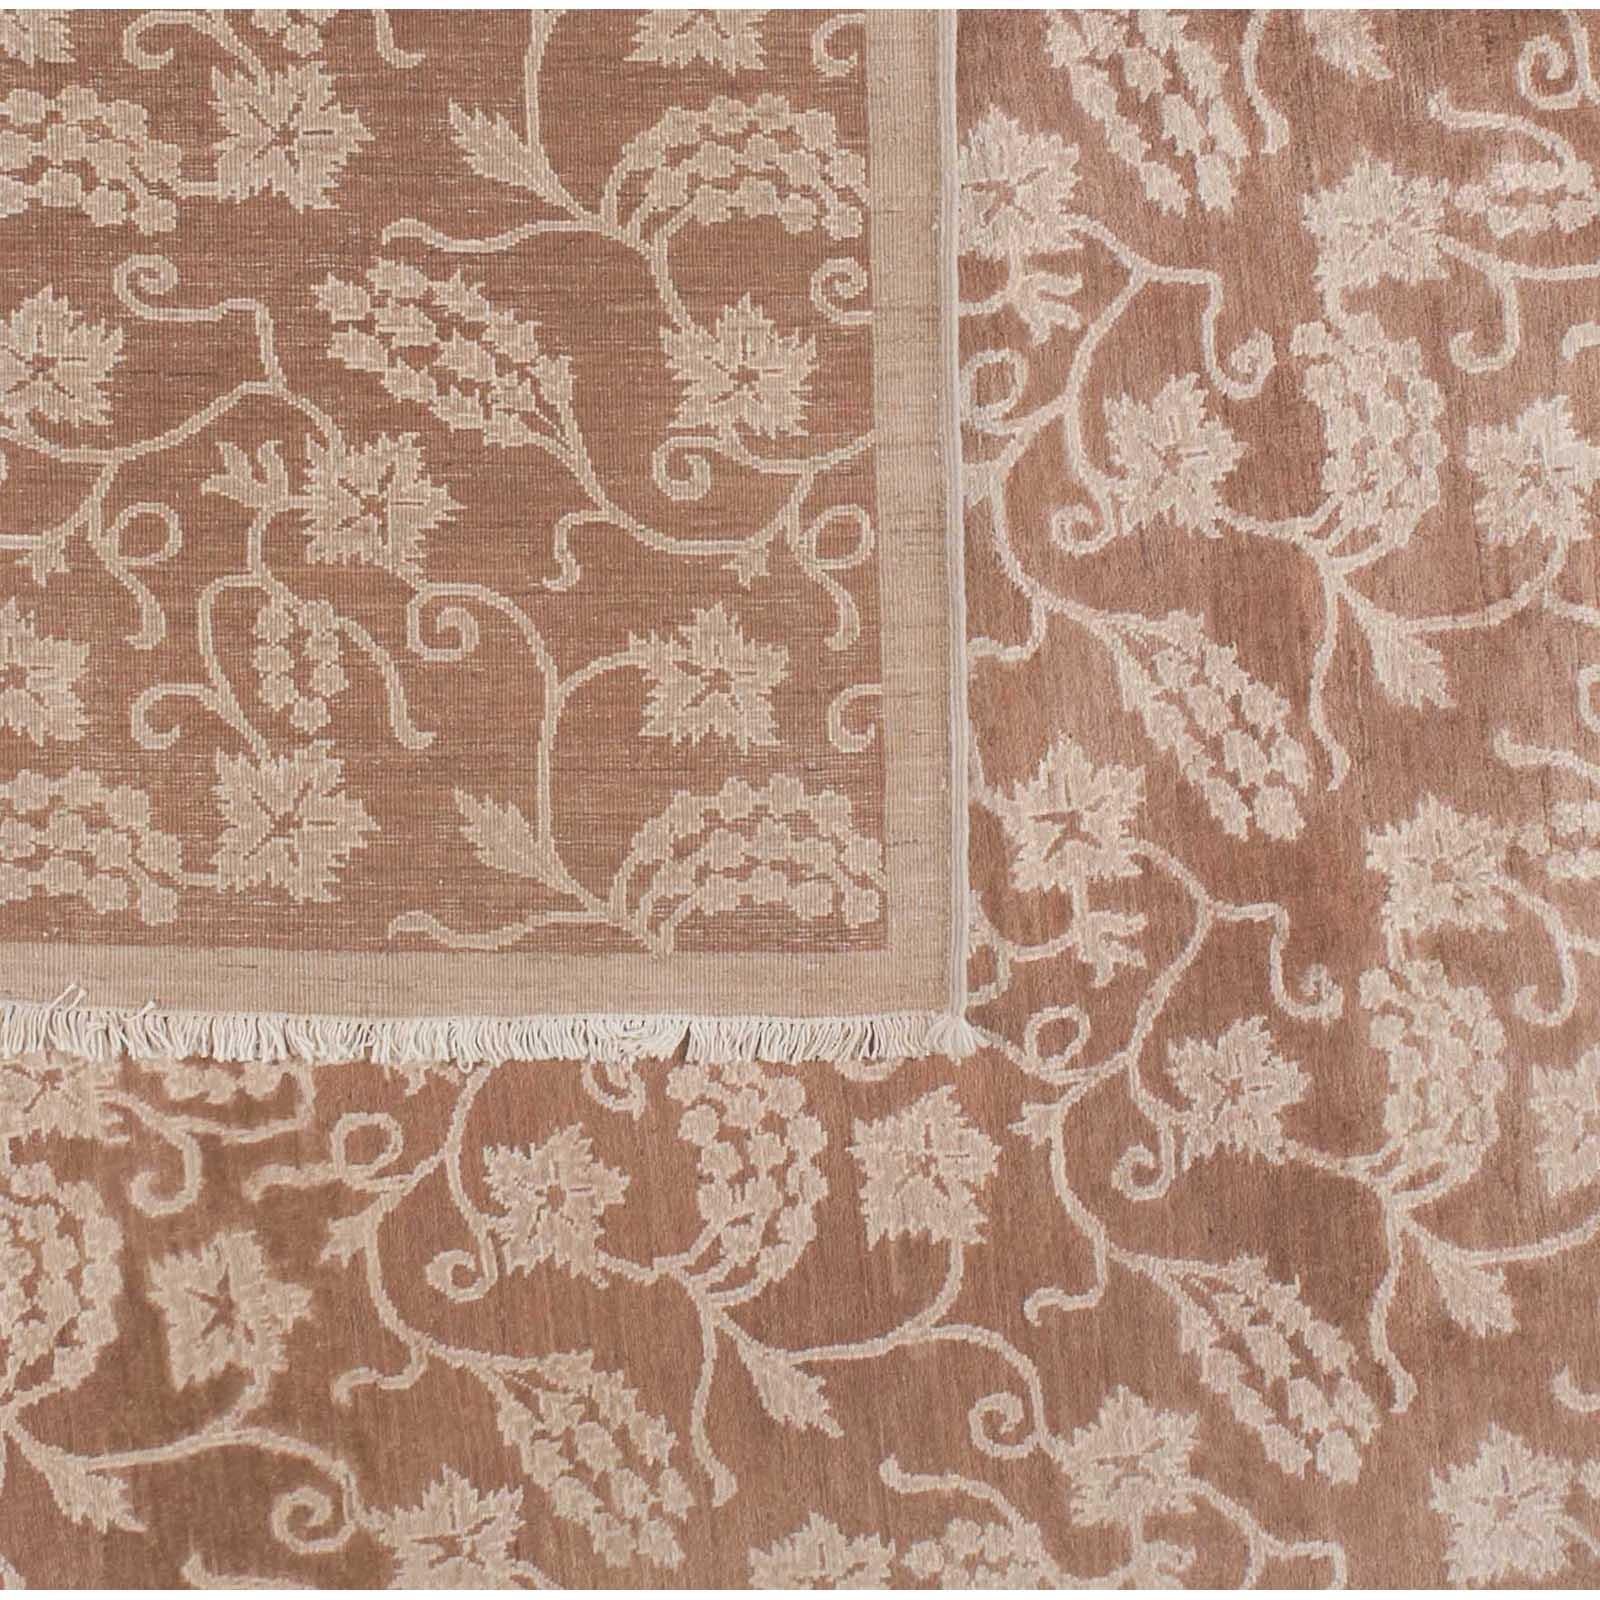 Flowers, leaves and vines in beige stand out against a warm brown background in this variation on a popular Pakistani design. Hand knotted in wool using vegetal dyes.